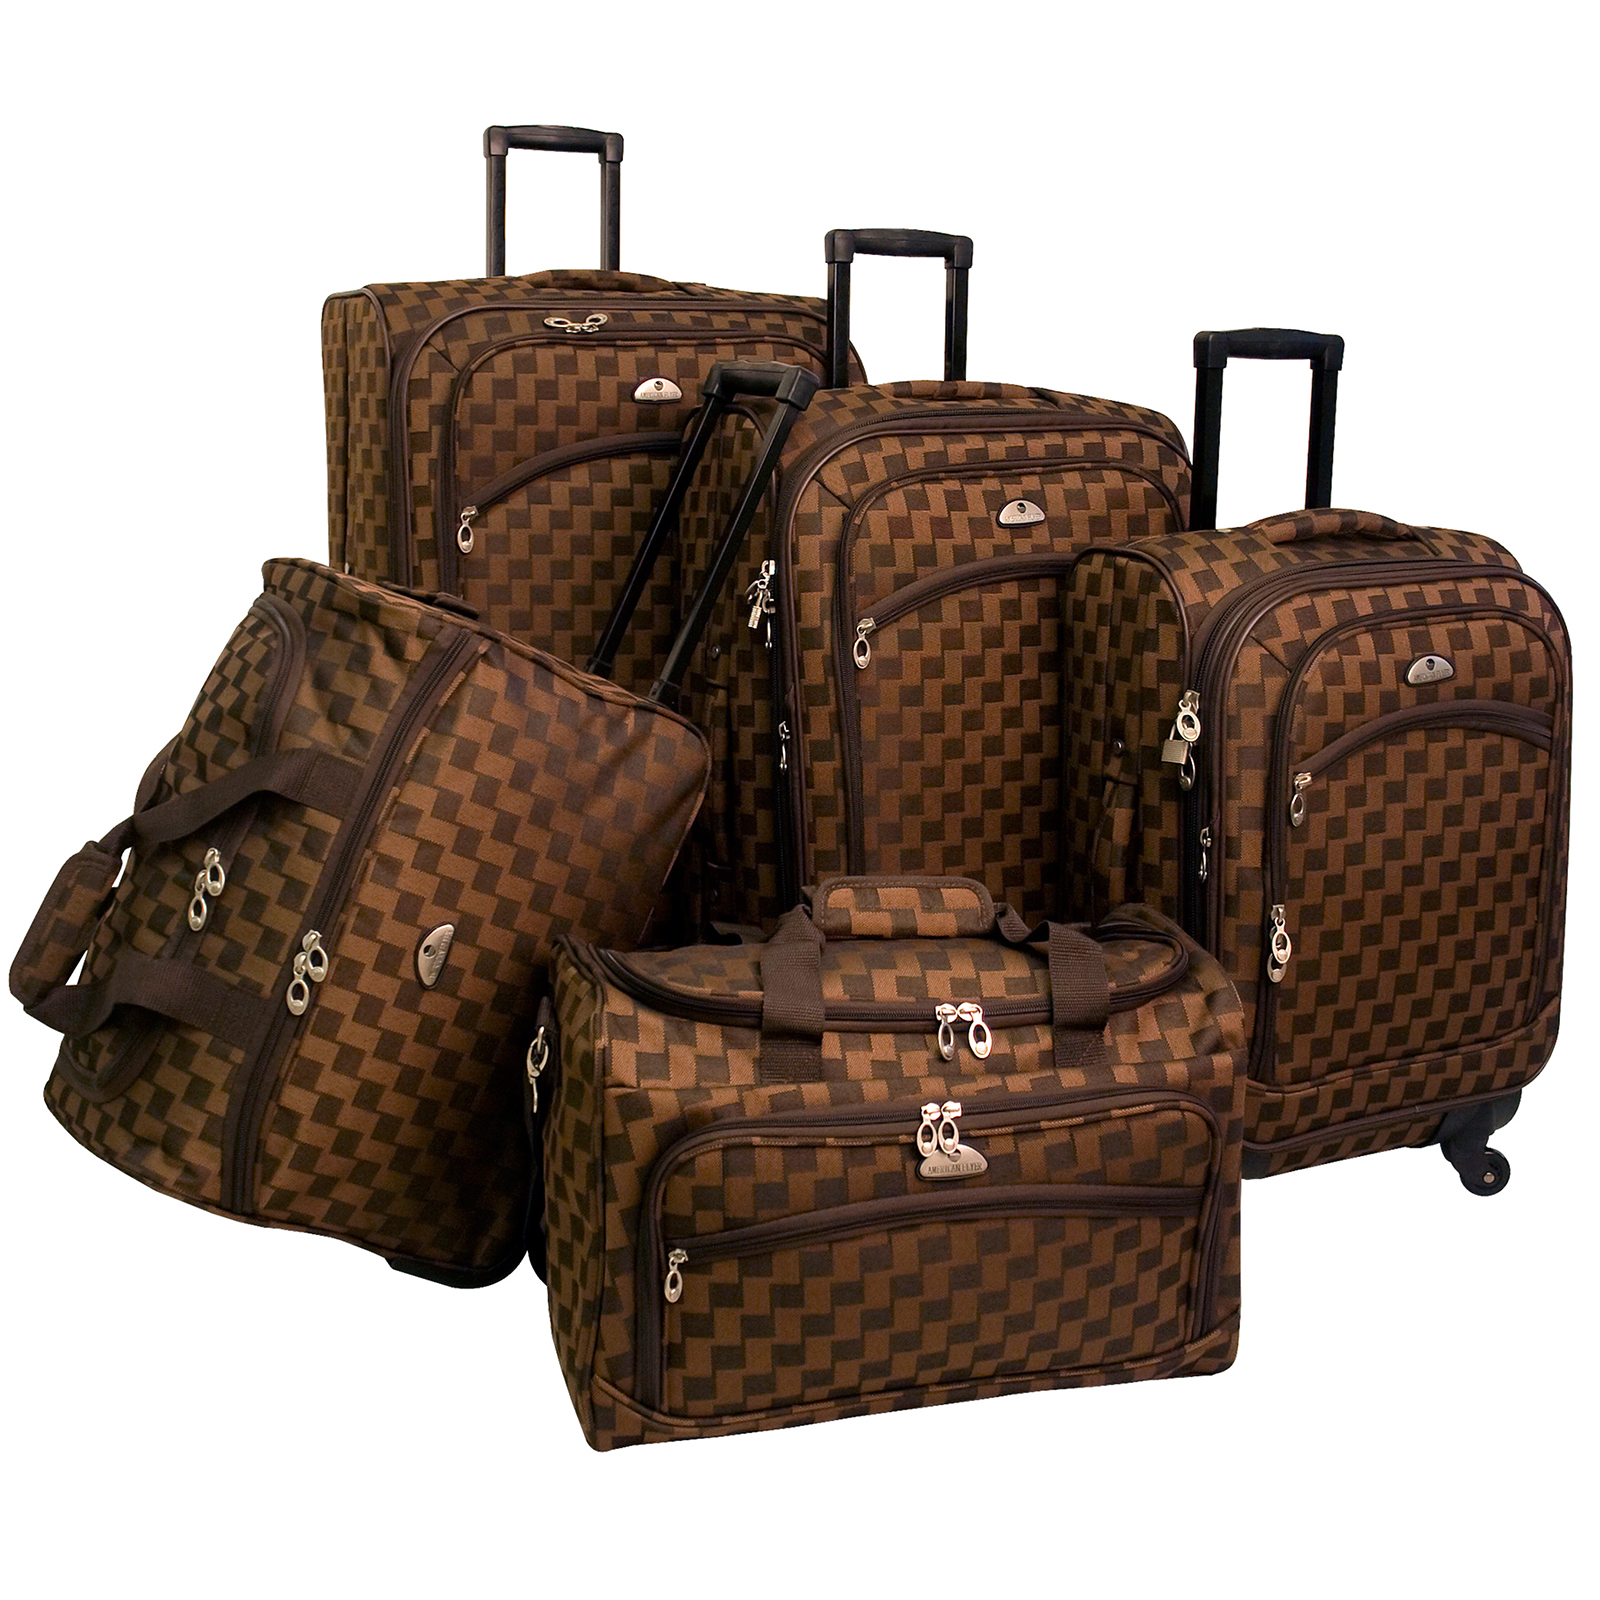 American Flyer Madrid 5-Piece Spinner Luggage Set - image 1 of 4